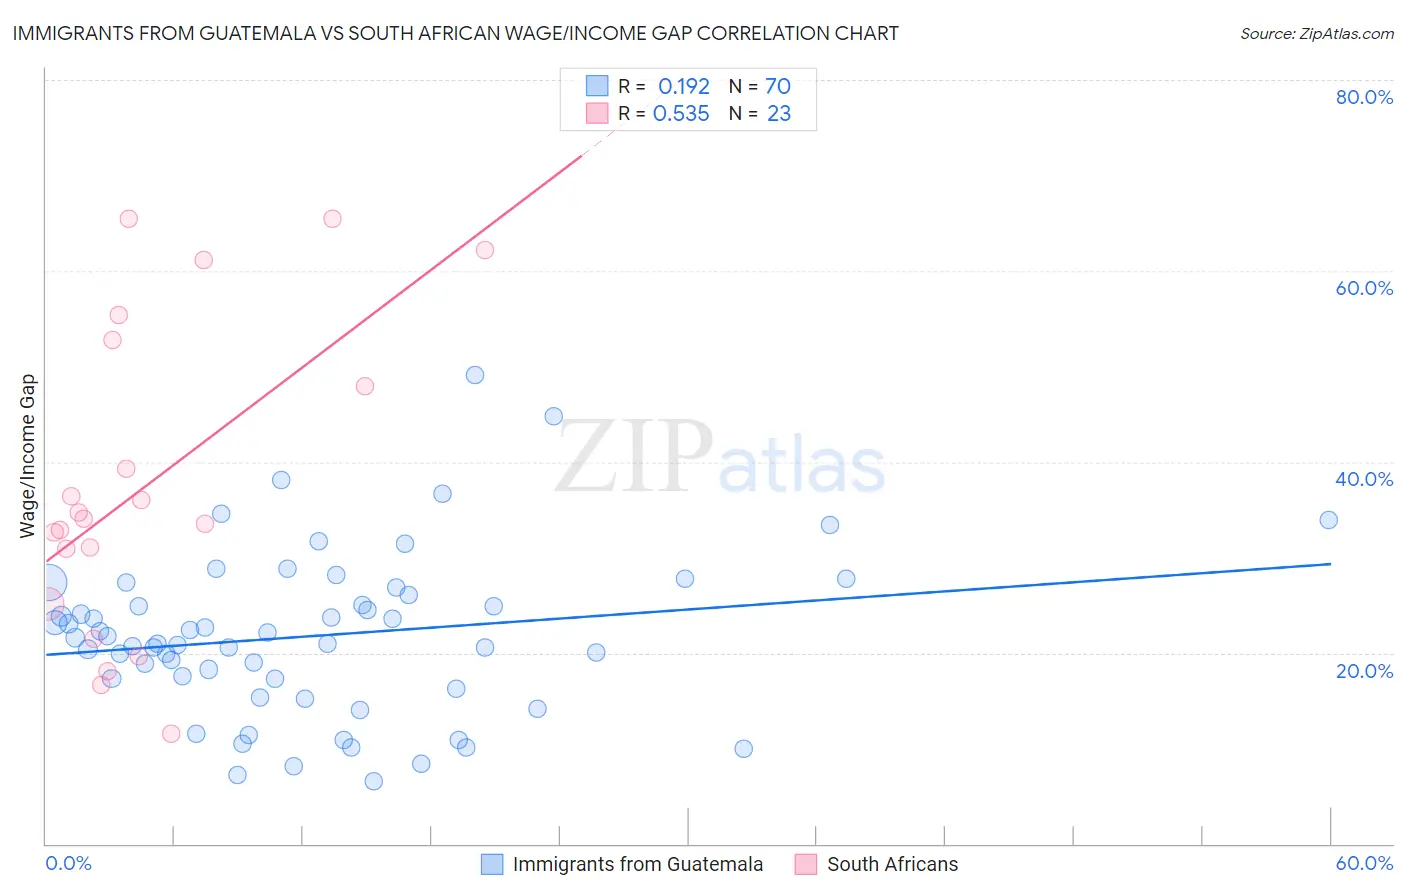 Immigrants from Guatemala vs South African Wage/Income Gap